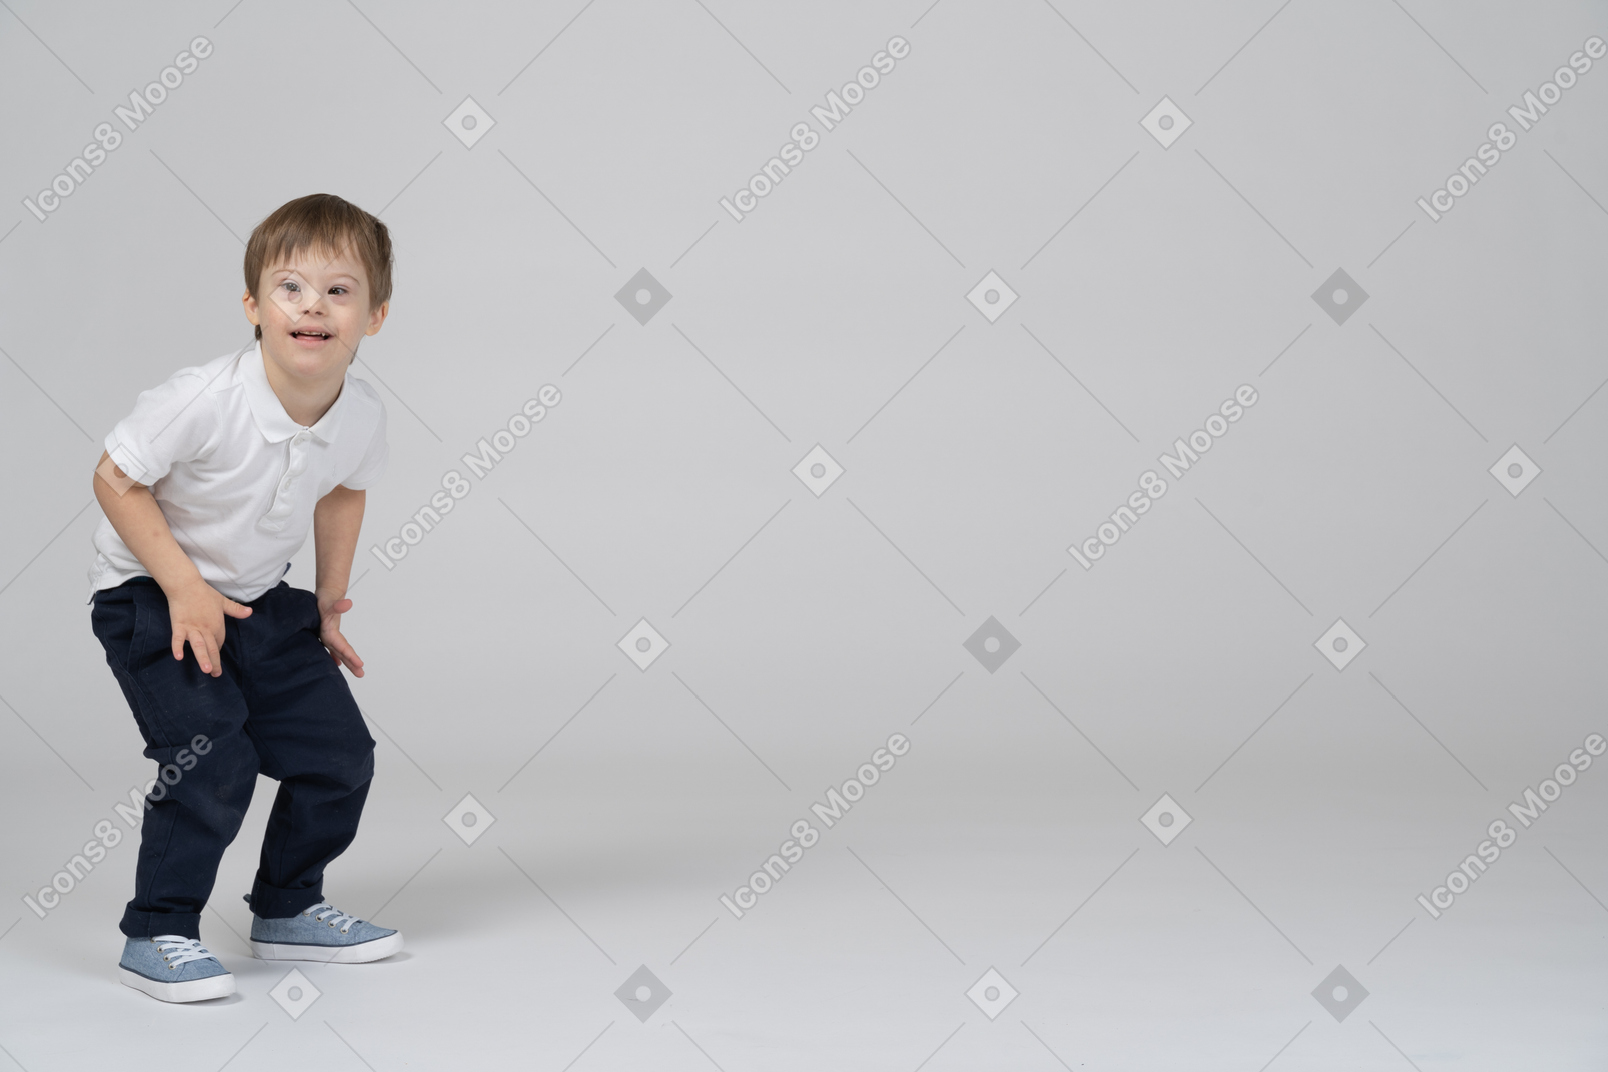 Boy standing in front of a wall with clouds